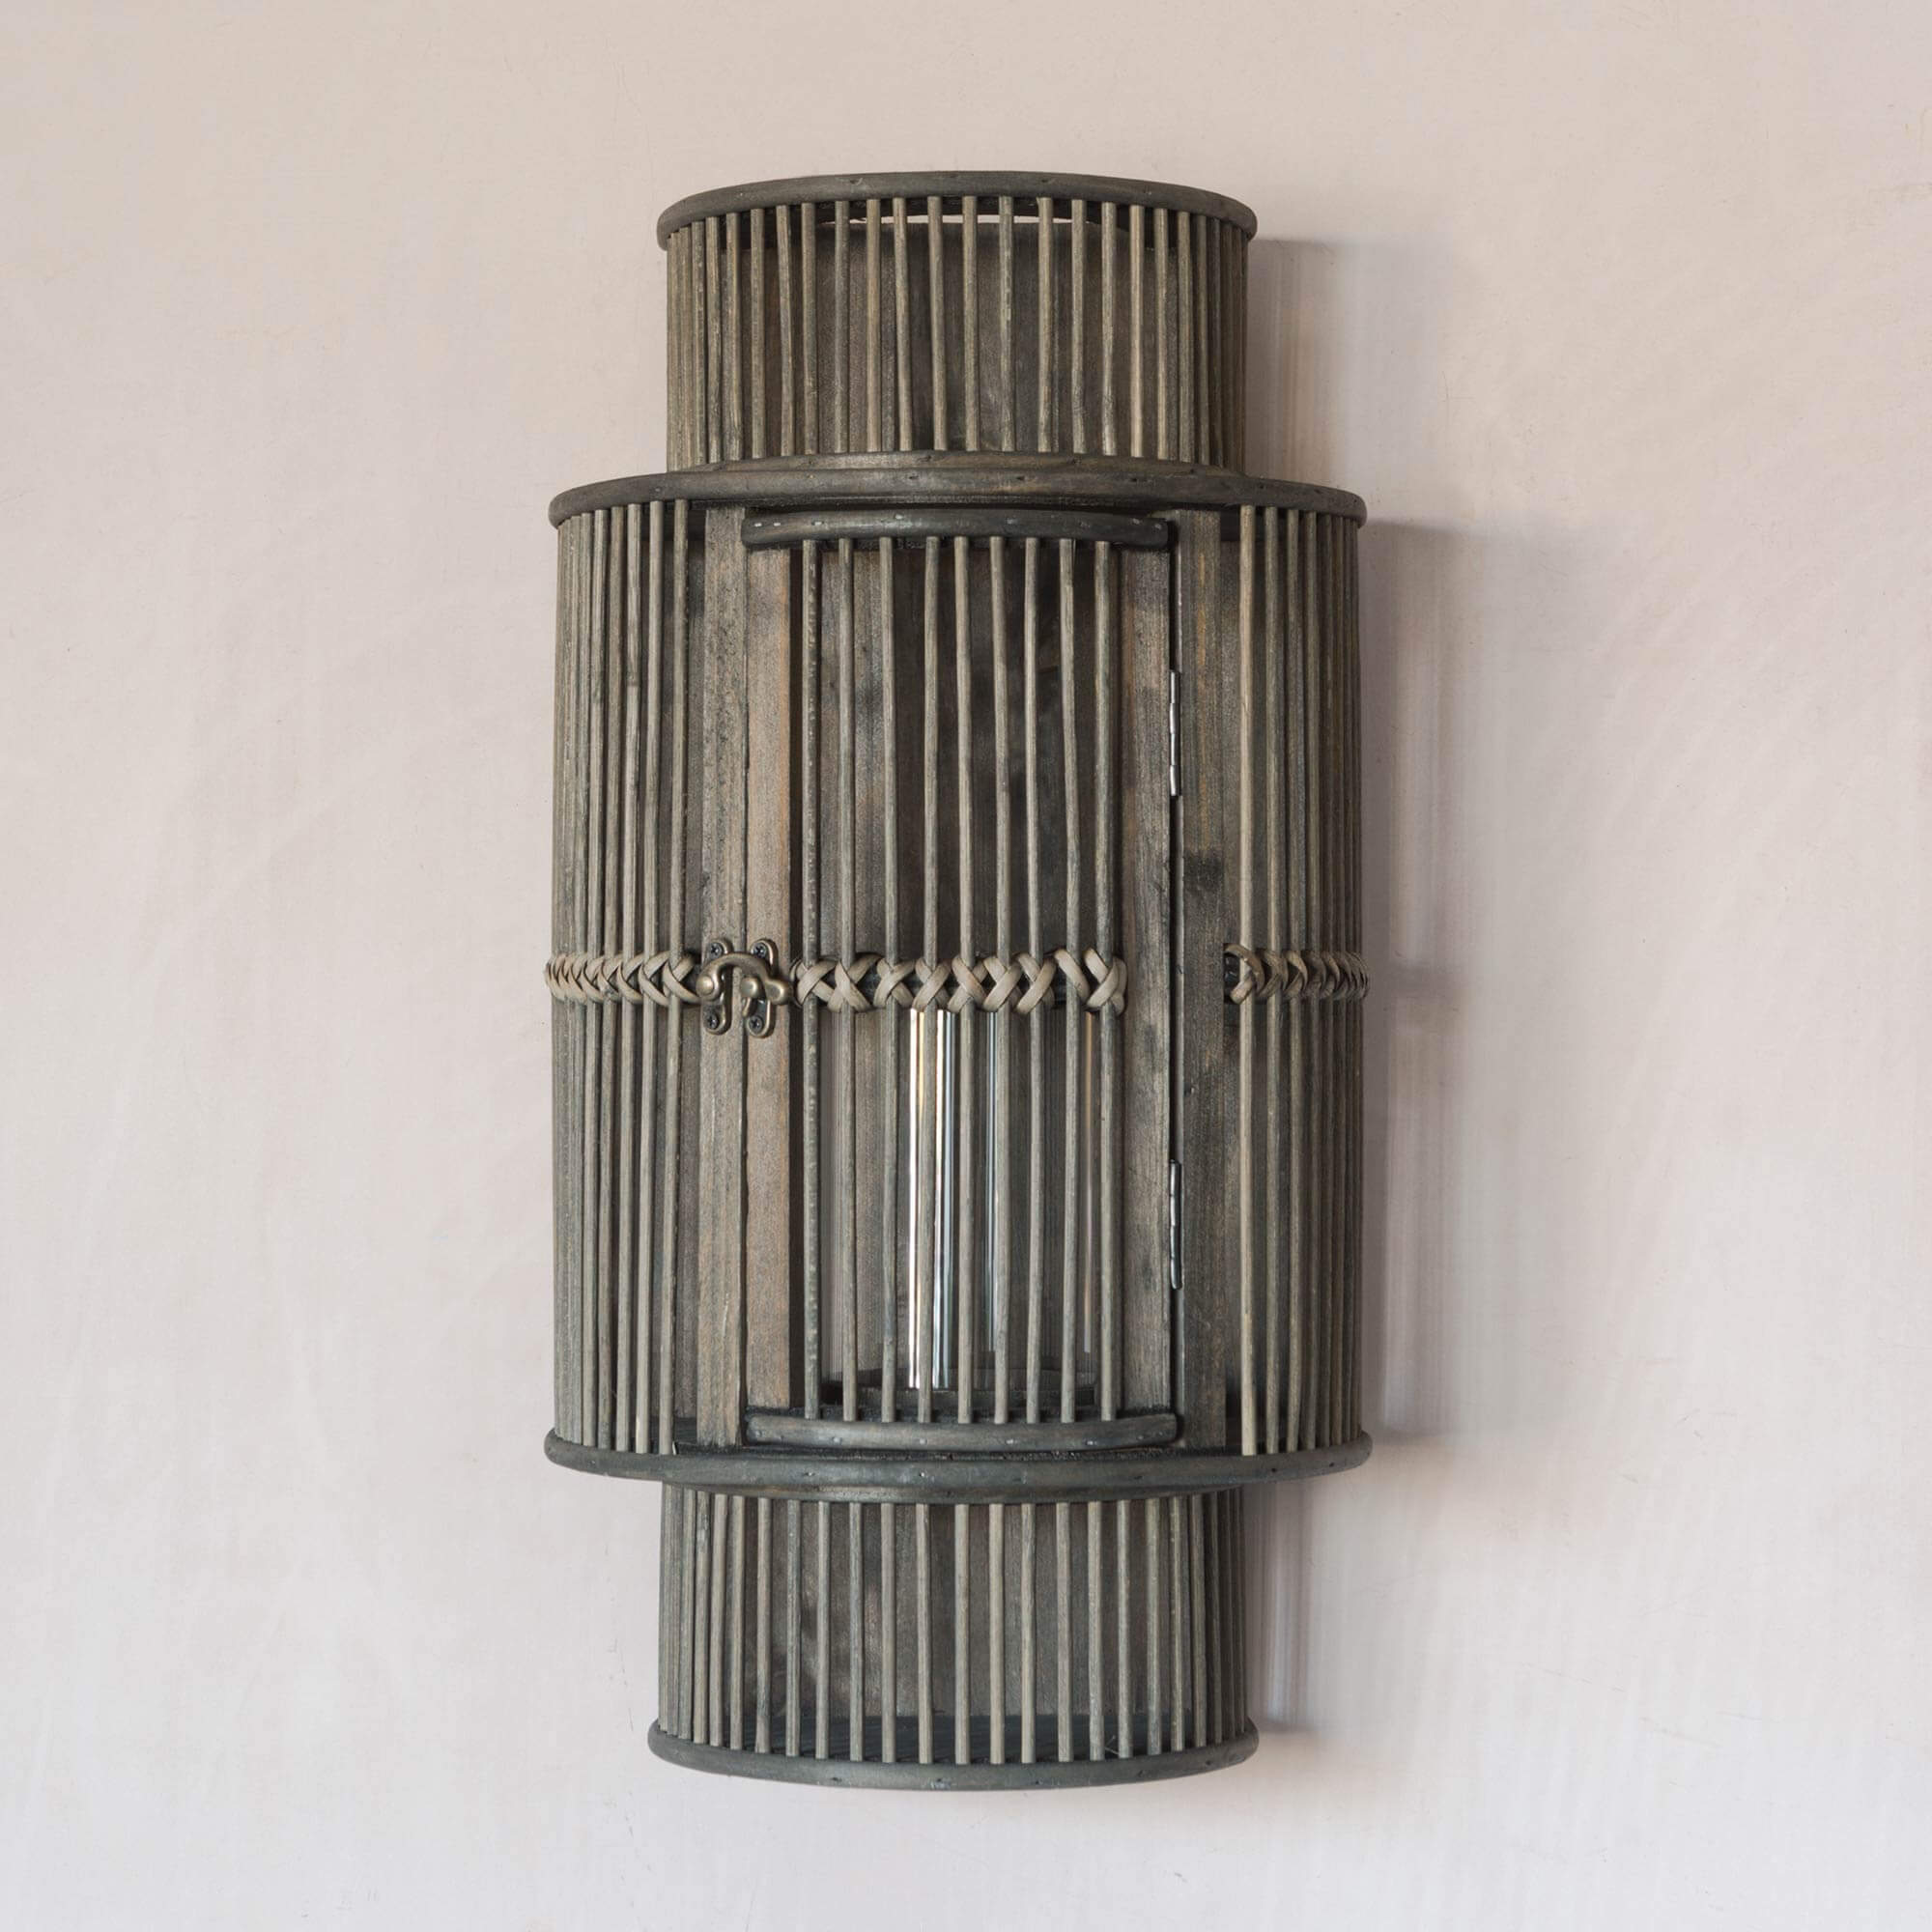 Read more about Graham and green black curved bamboo lantern